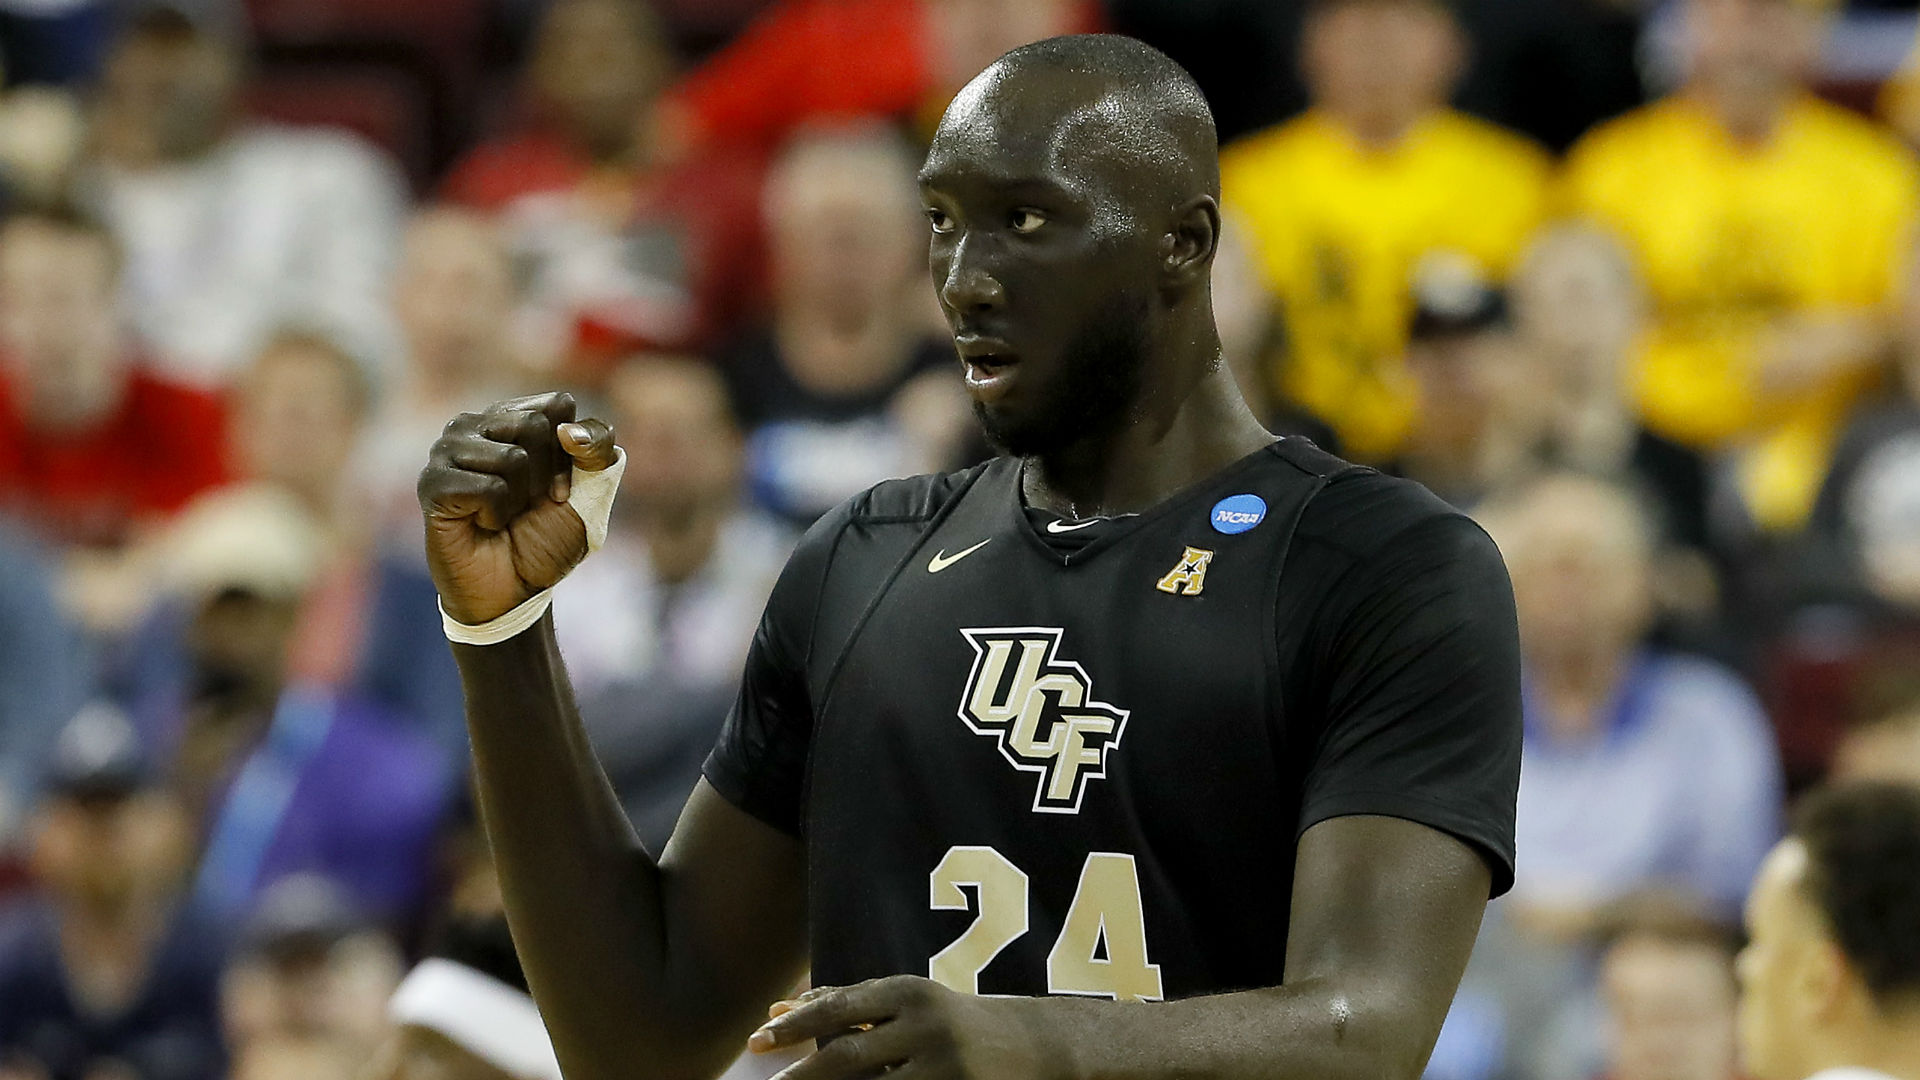 Tacko Fall, the tallest player in college basketball at 7ft 6in, is adamant he will not end up on a Zion Williamson highlight tape.